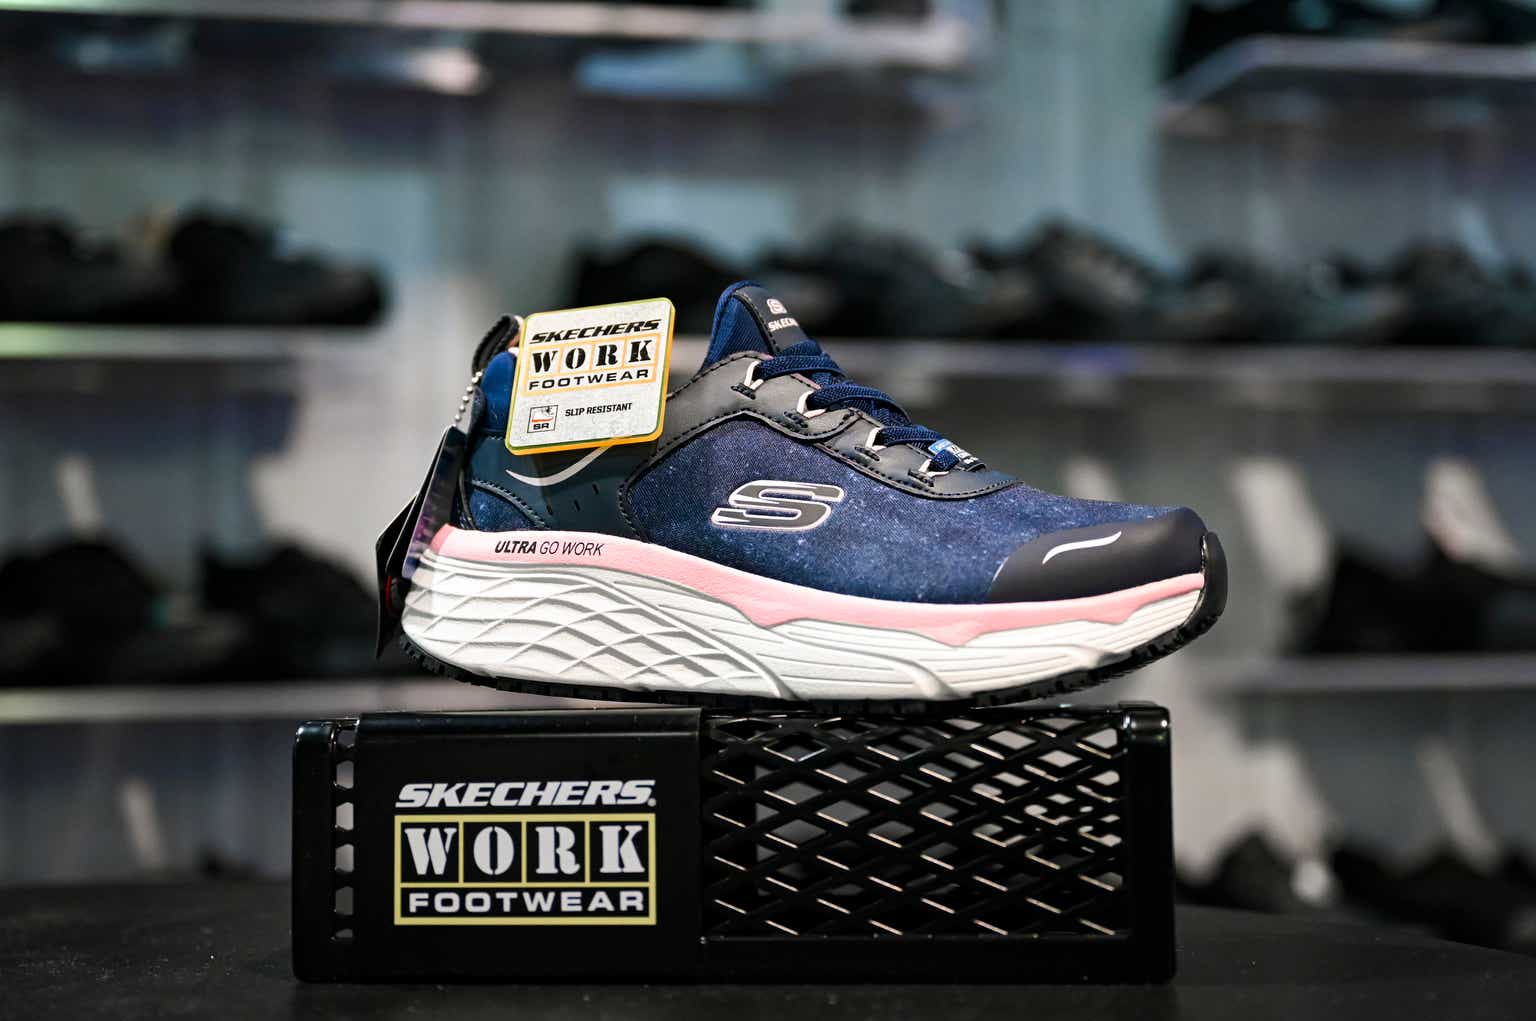 Skechers: Good Growth Prospects At An Attractive Valuation | Seeking Alpha